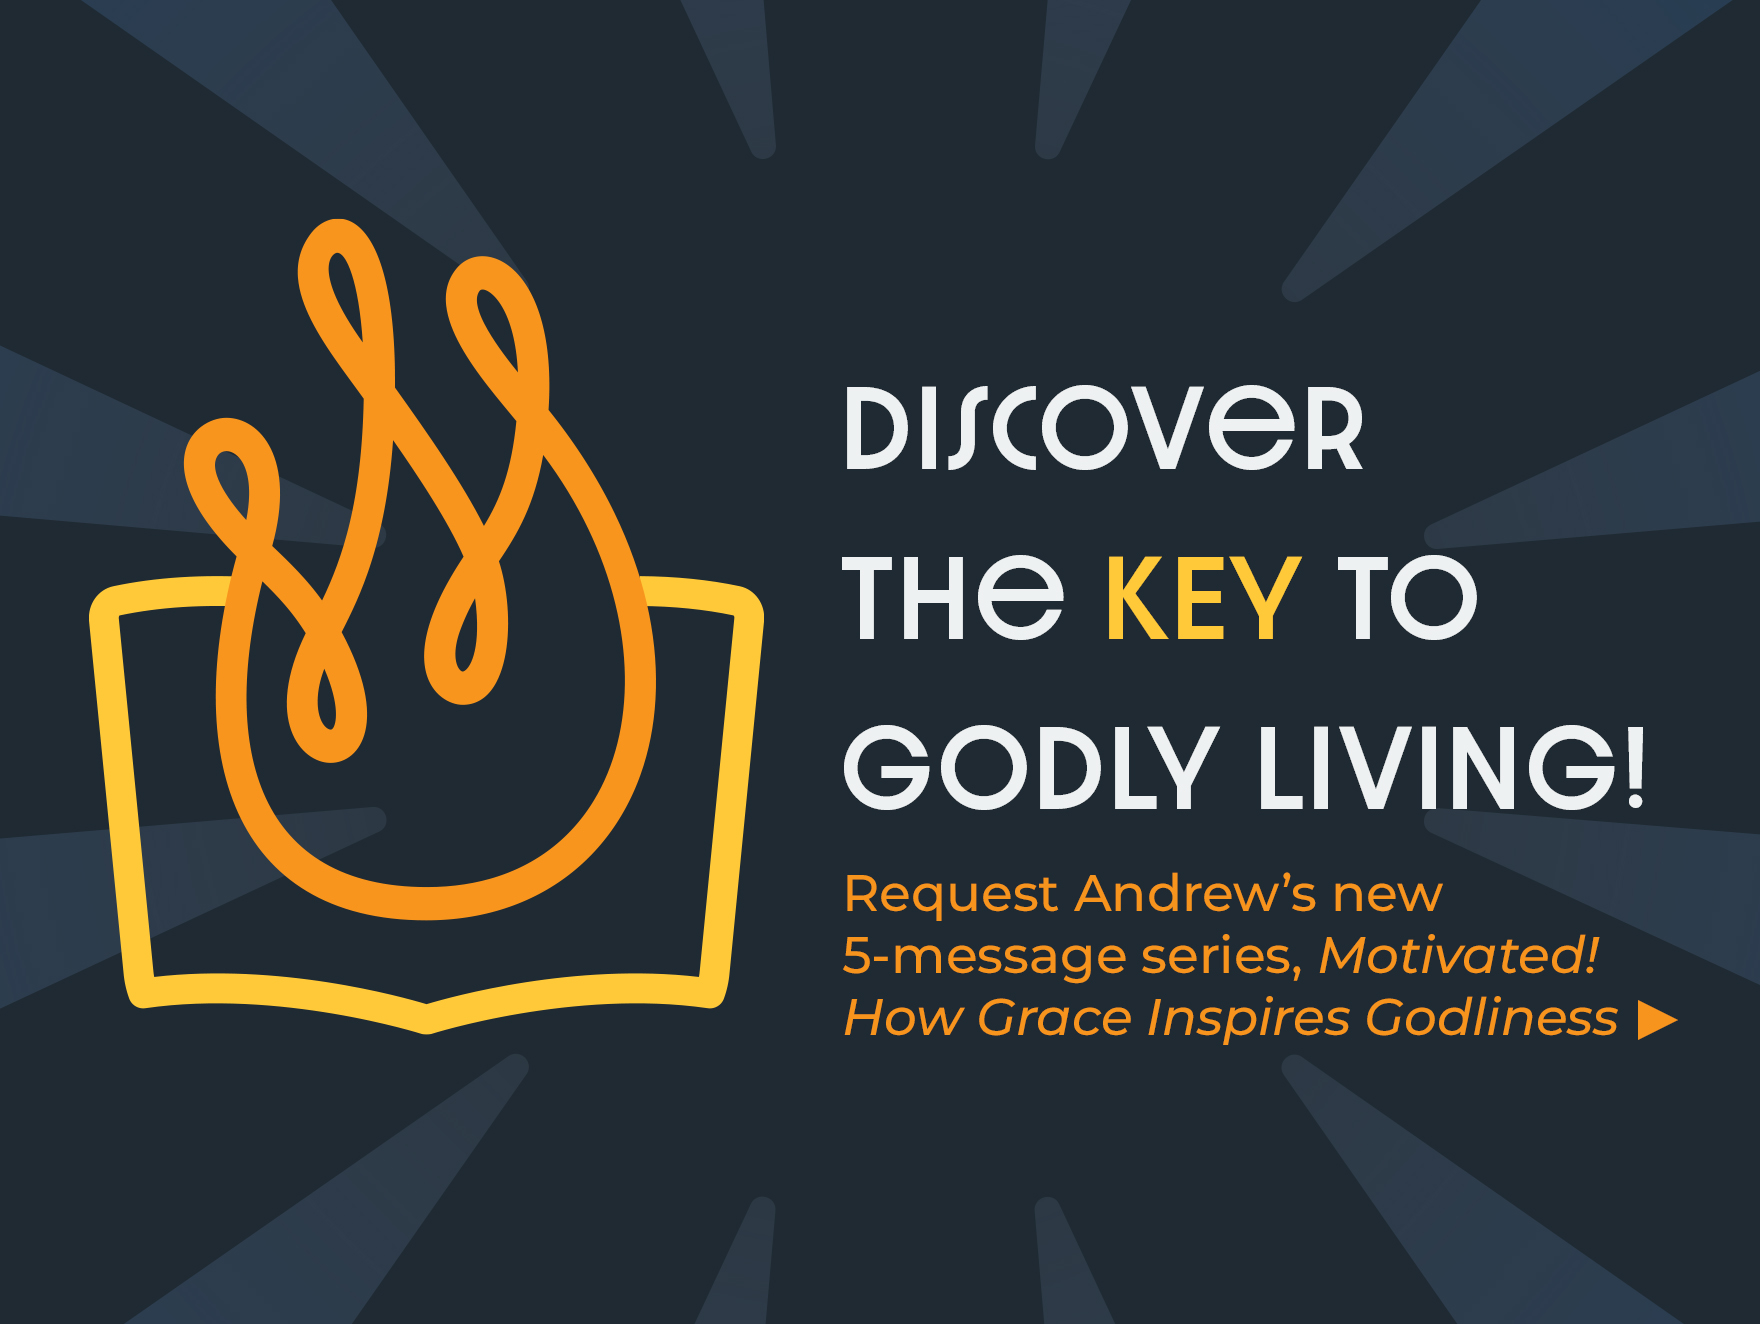 Request Andrew's series, "Motivated! How Grace Inspires Godliness"